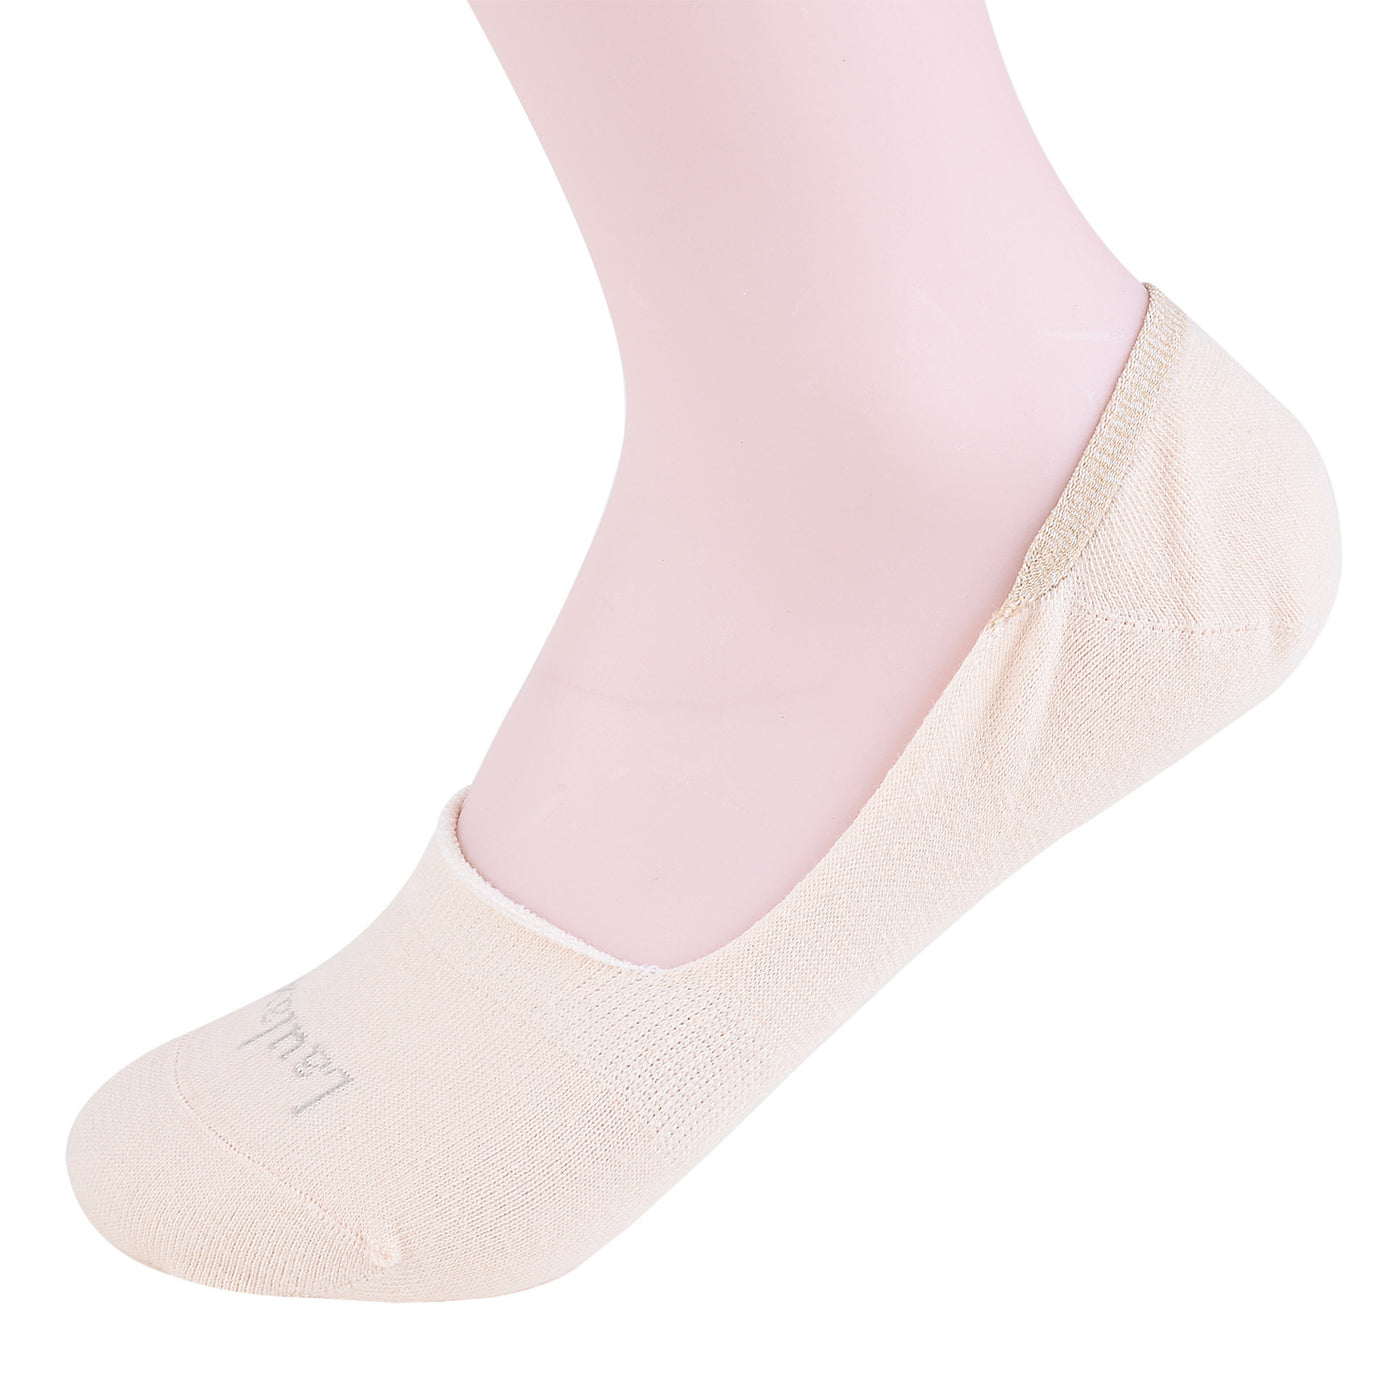 2 Pairs Finest Combed Cotton Invisible Socks Plain - Beige